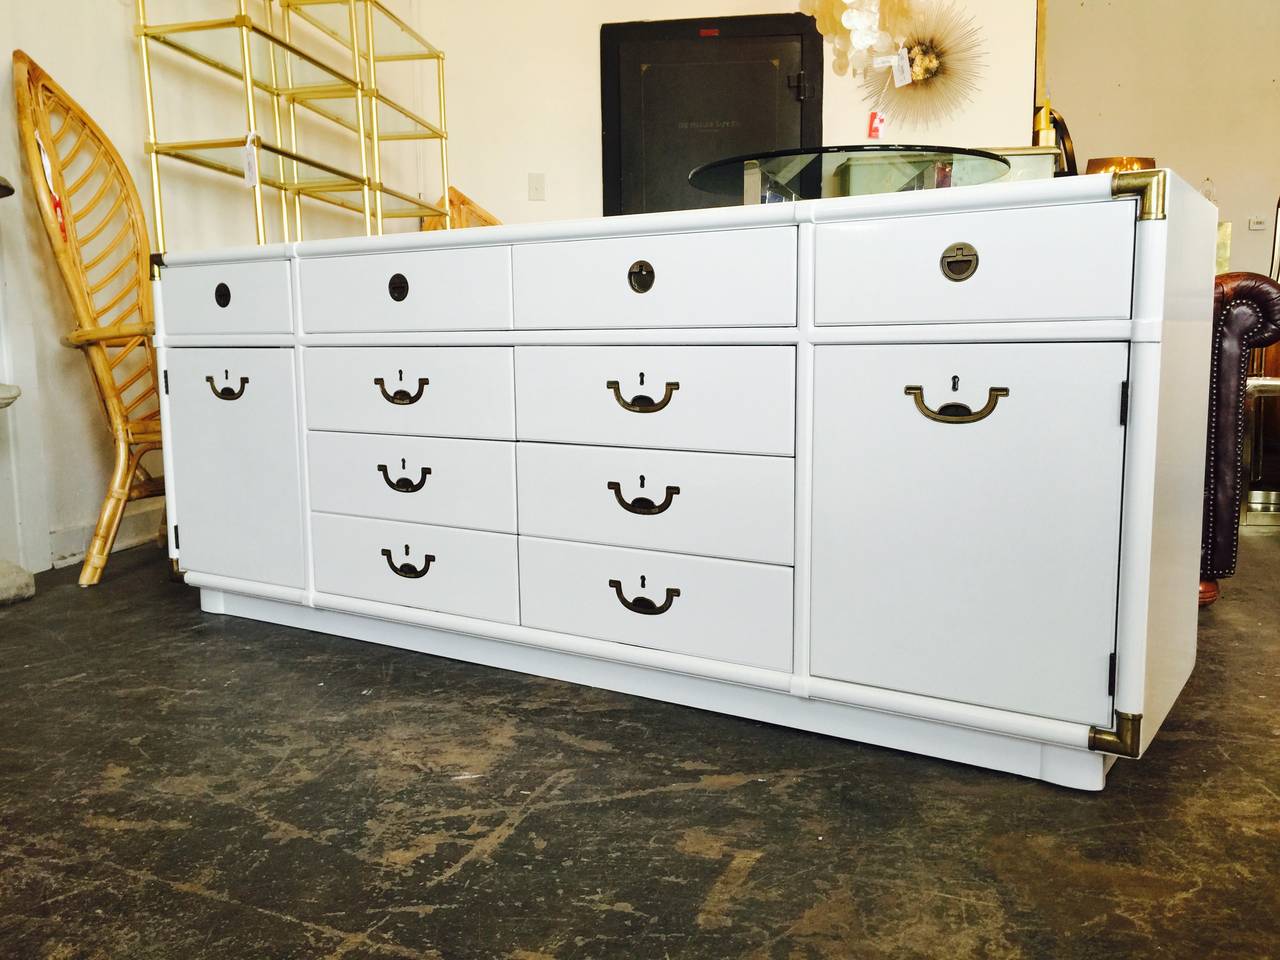 Newly lacquered campaign dresser by Drexel in white. This dresser has ample storage with ten drawers and two doors with shelving.

Dimensions: 77.5